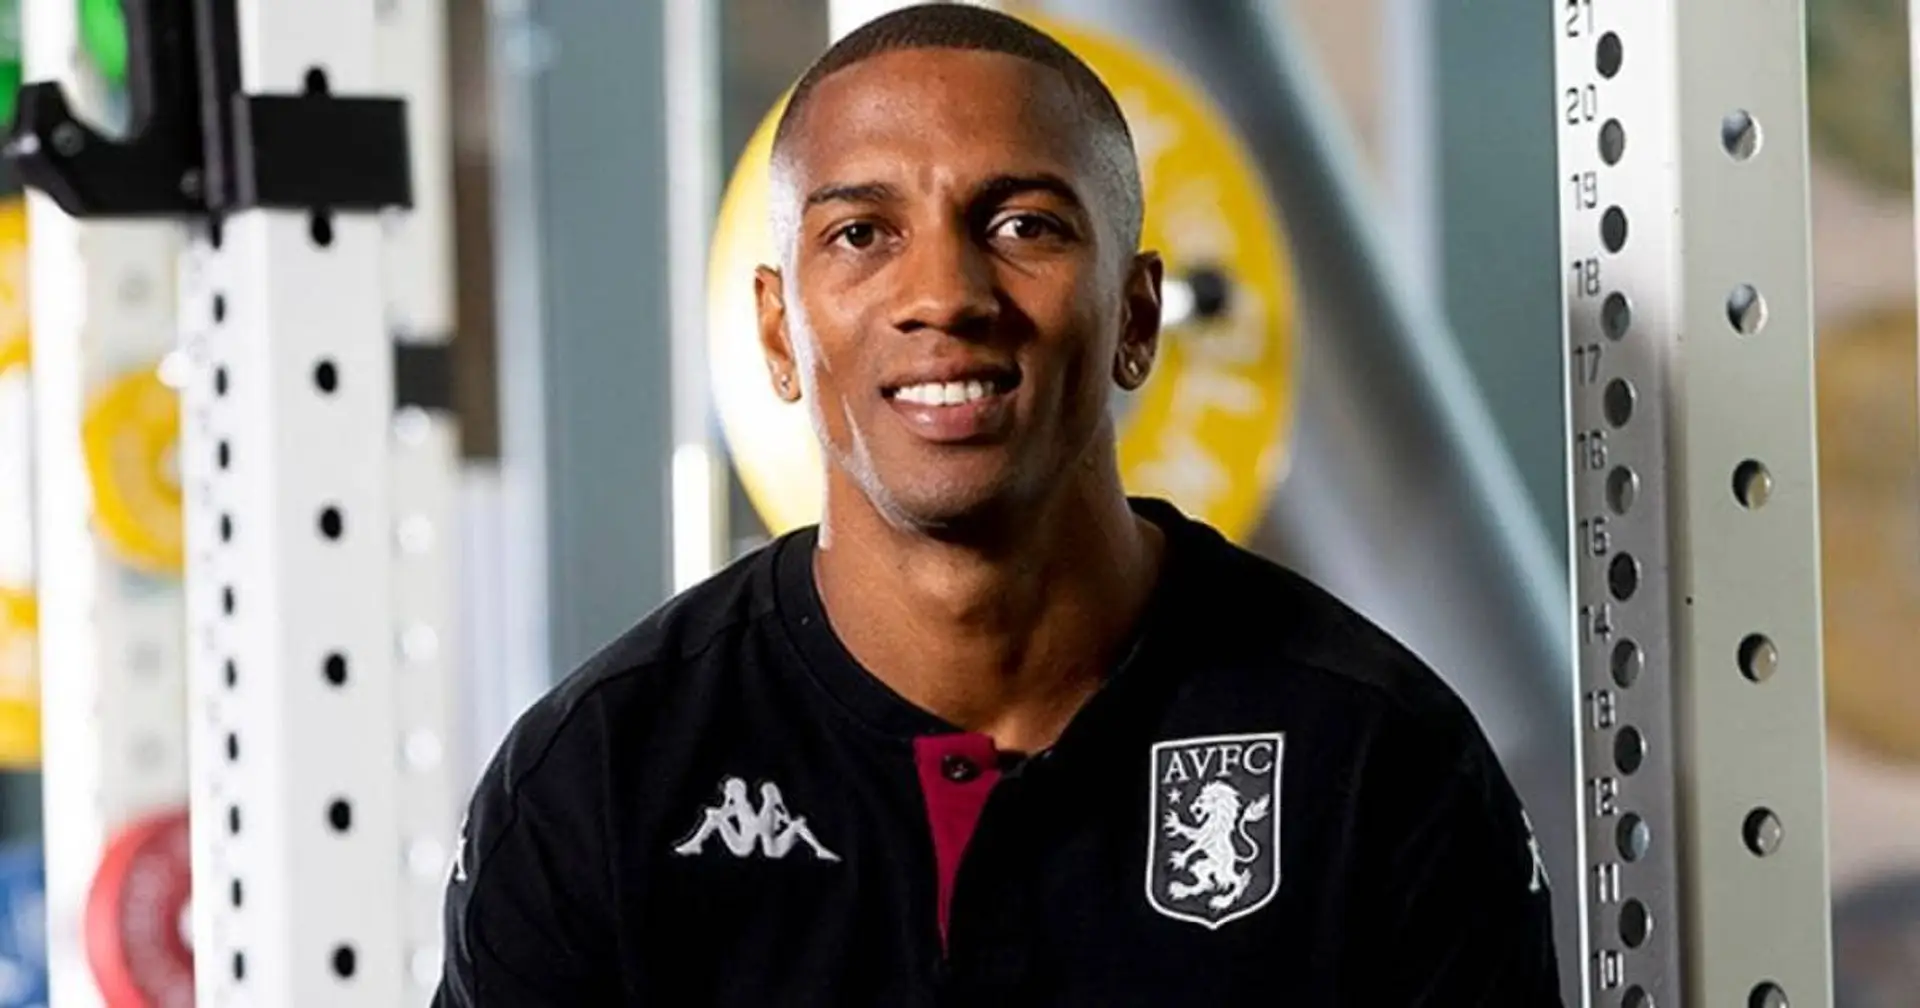 OFFICIAL: Ashley Young joins Aston Villa on a free transfer